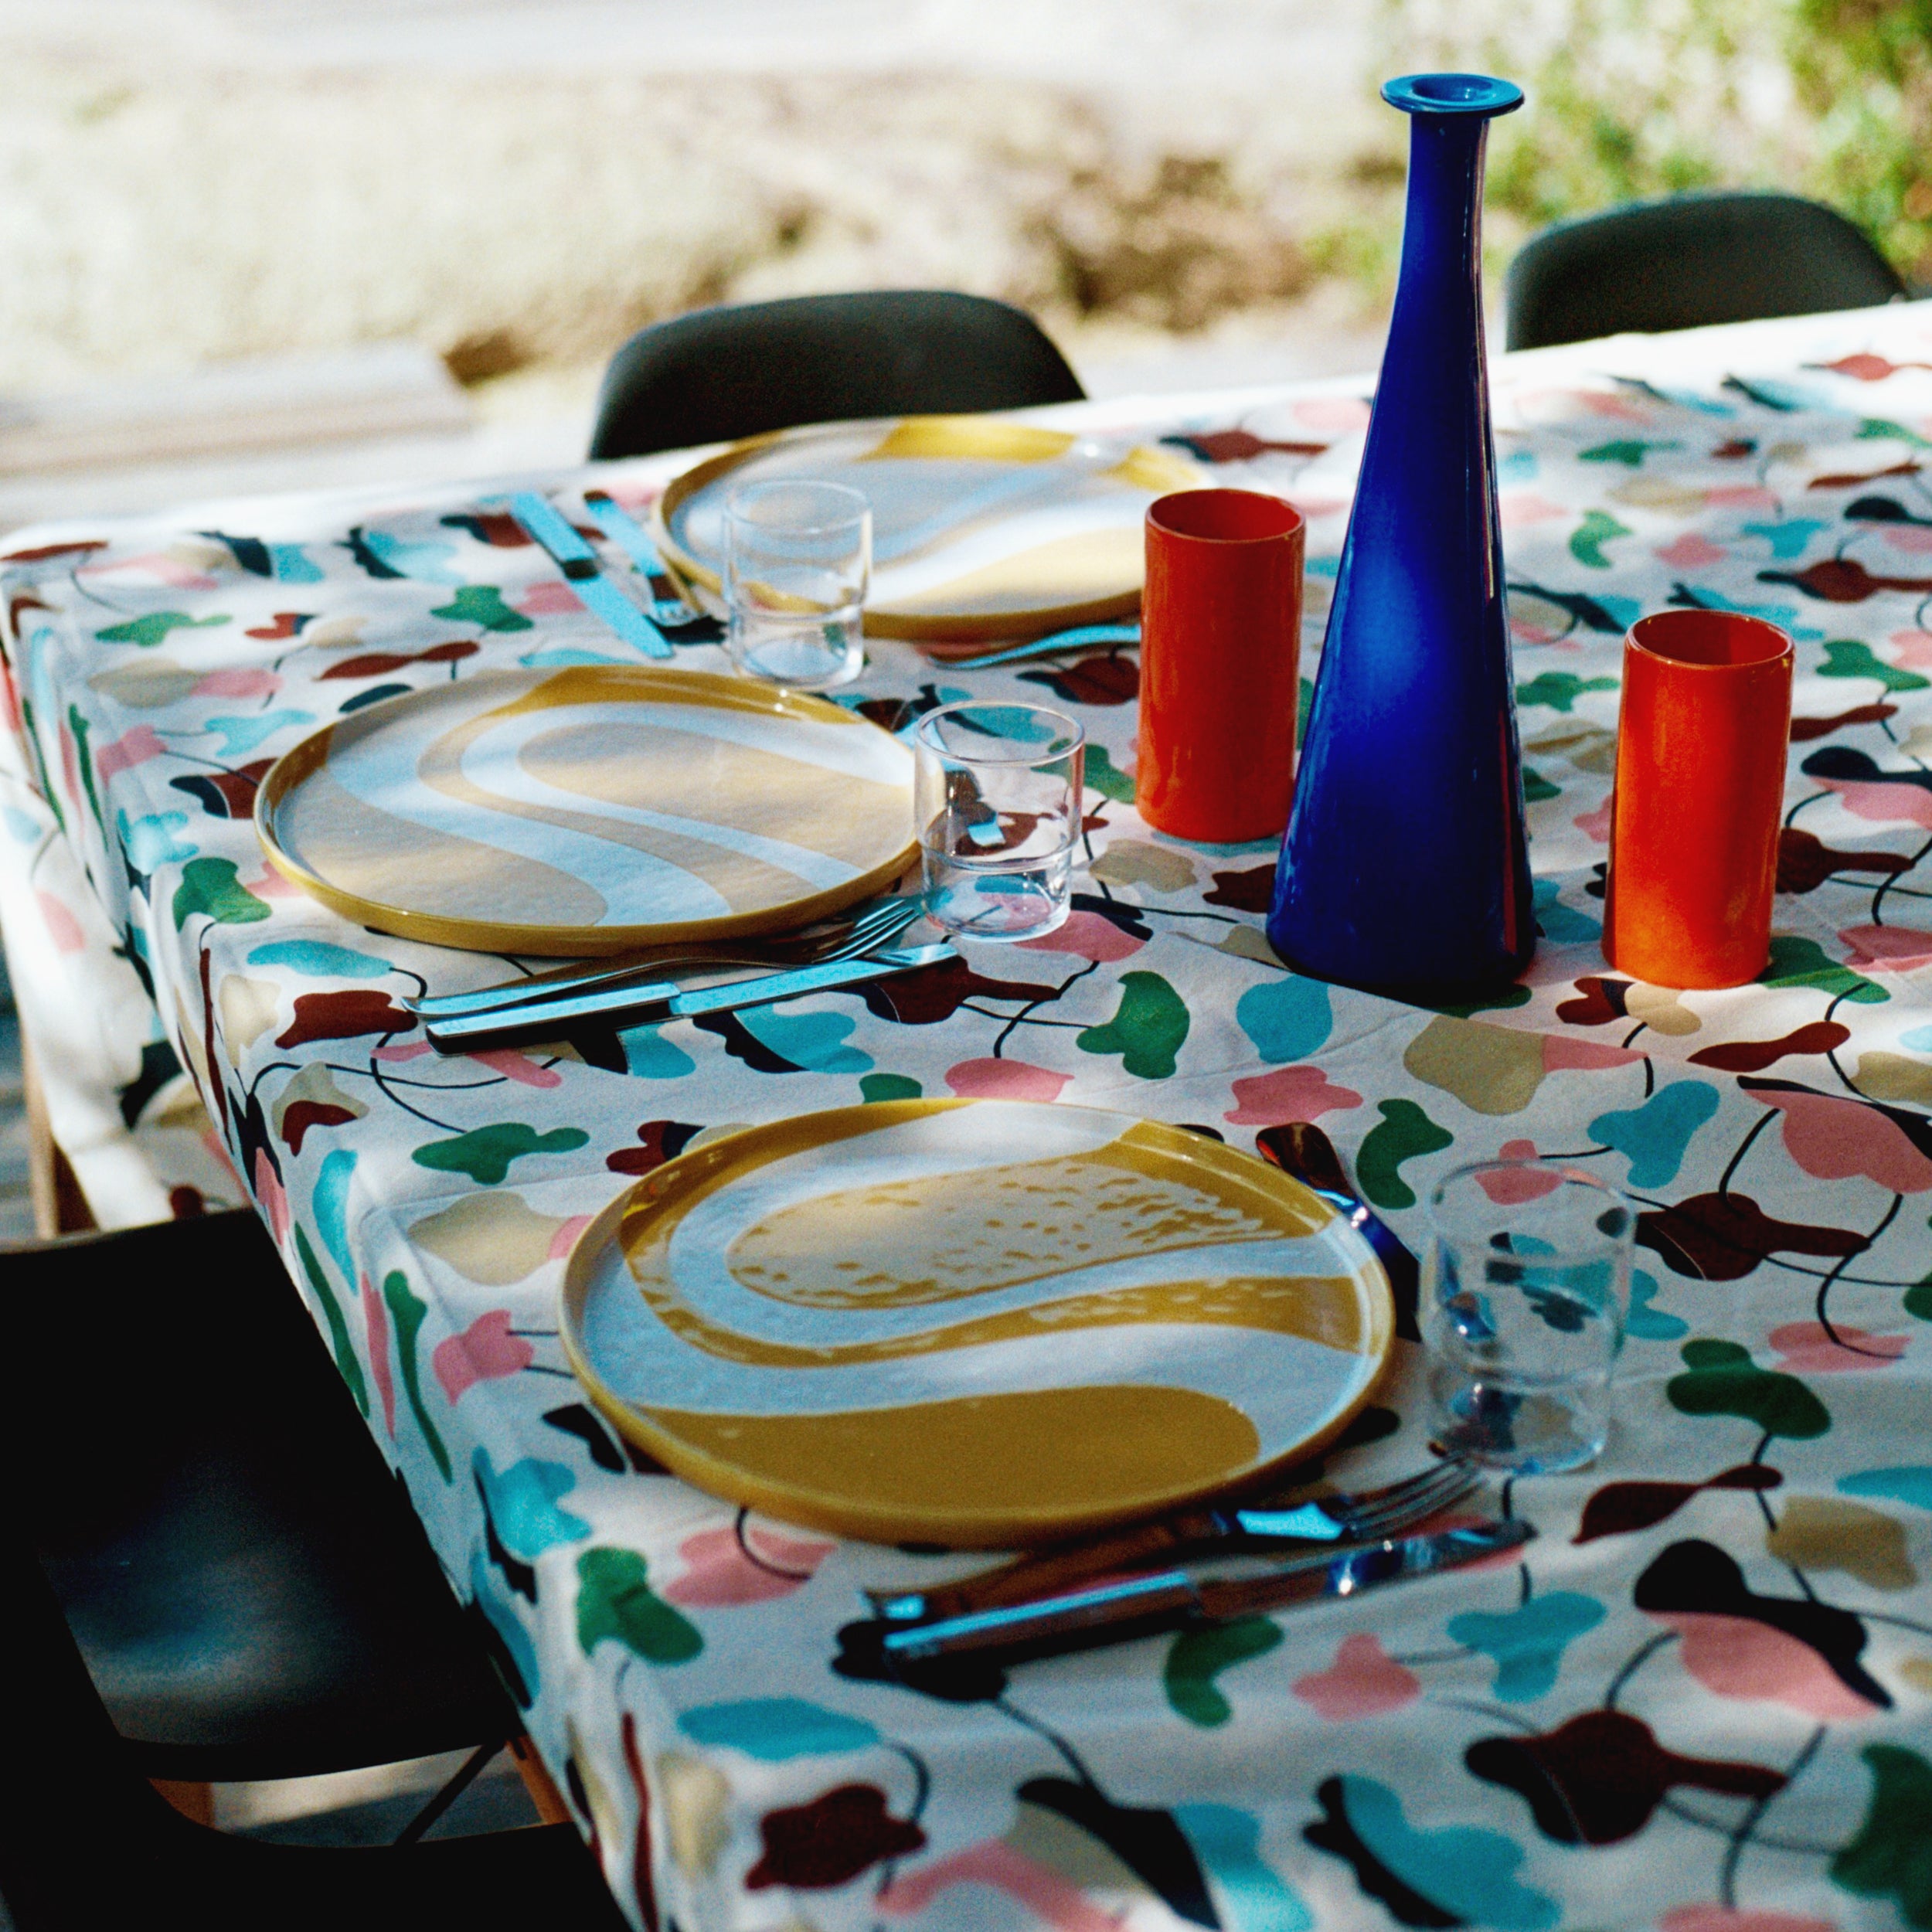 Hand screen printed cotton table cloth - Amoeba floral pattern